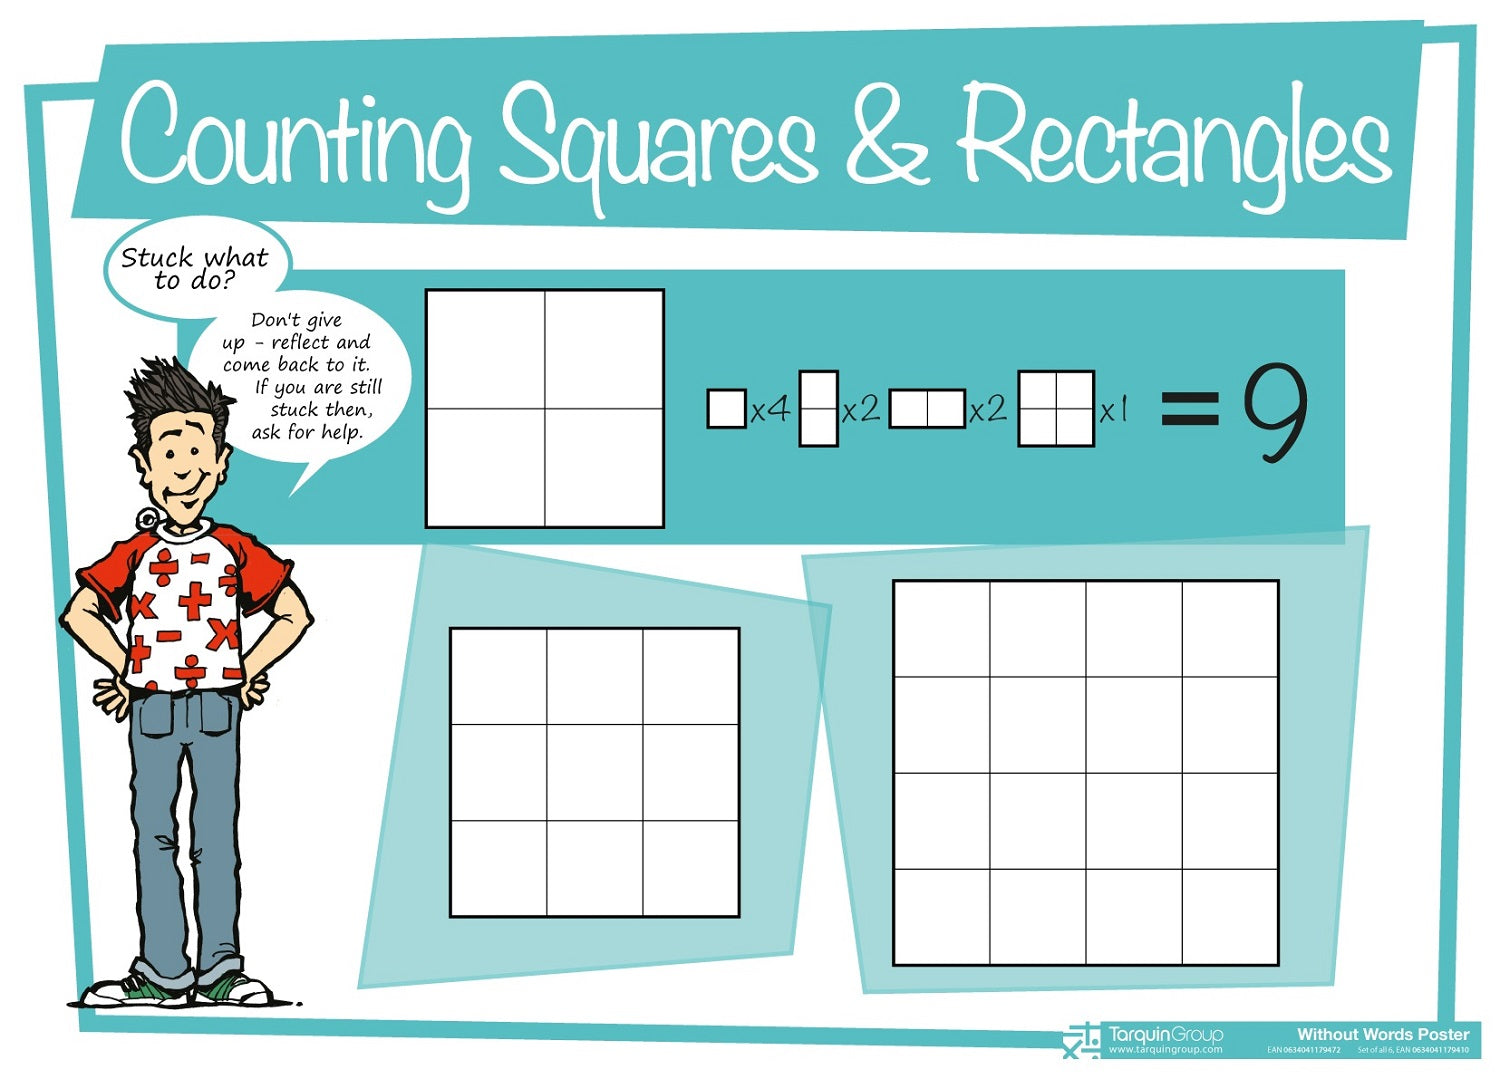 Counting Squares and Rectangles Poster